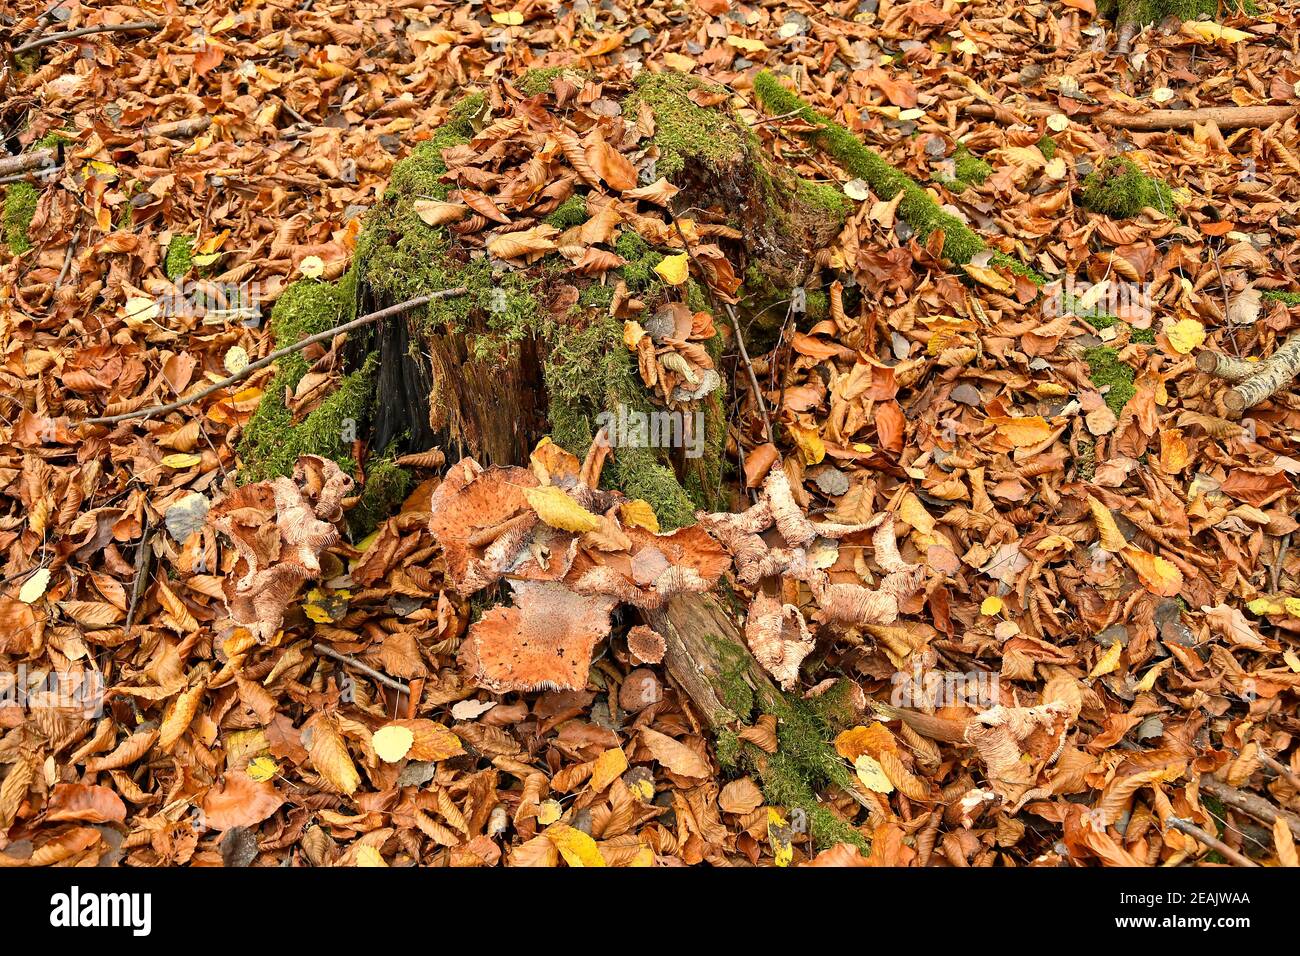 autumnal colored beech leaves with a tree trunk with mushrooms Stock Photo